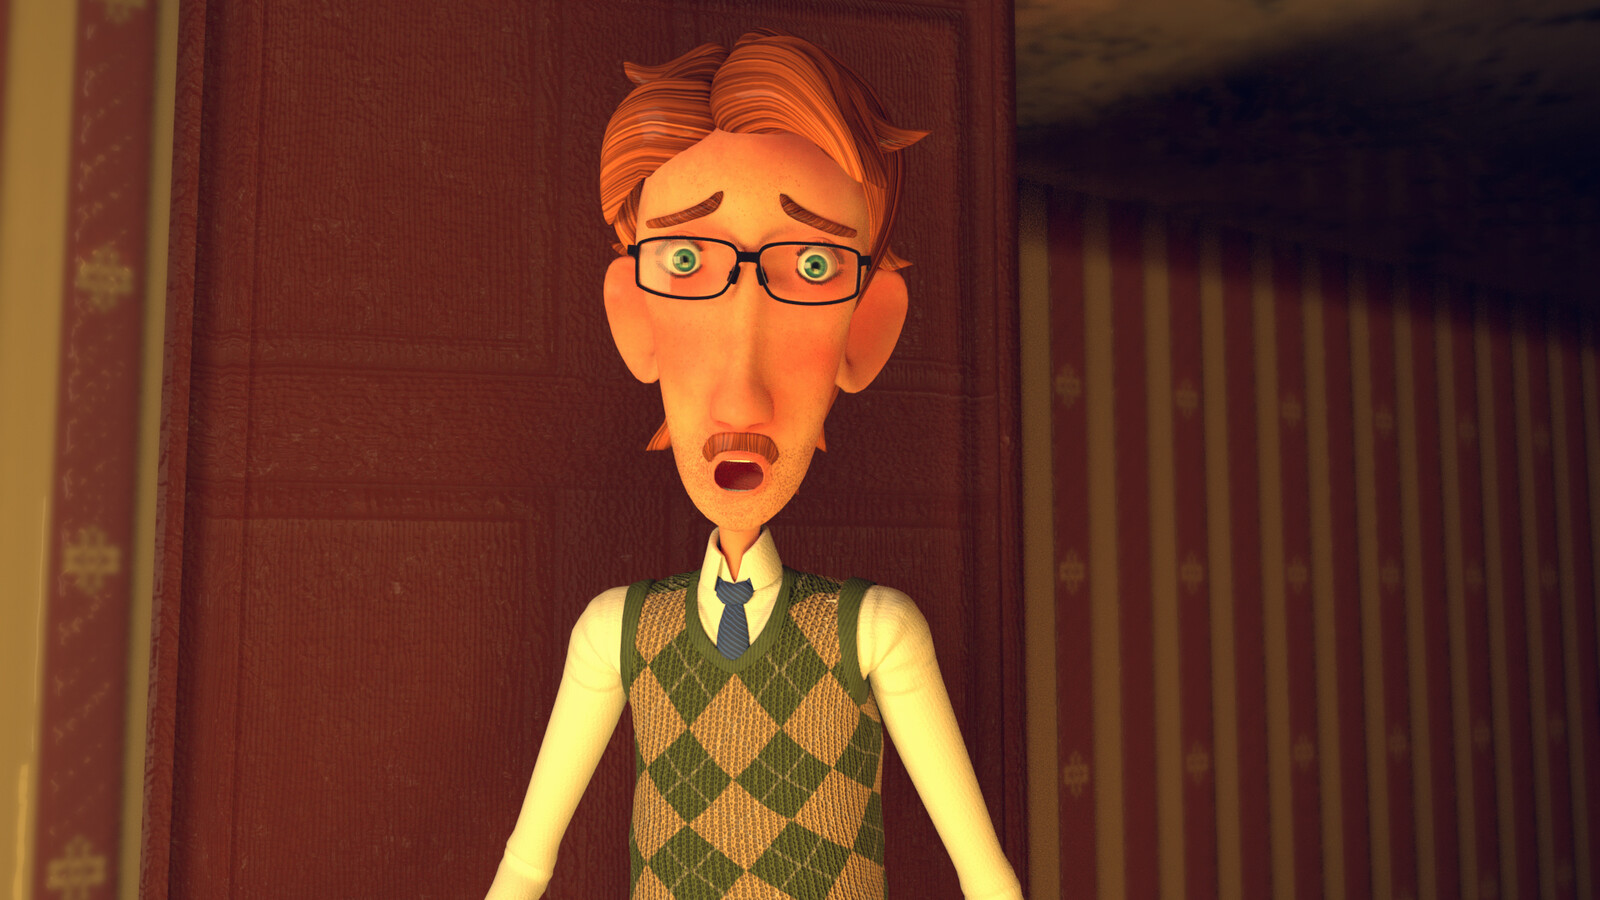 Barry the 60's 70's dad husband animated 3d cg character from my "Suburbia" short film.